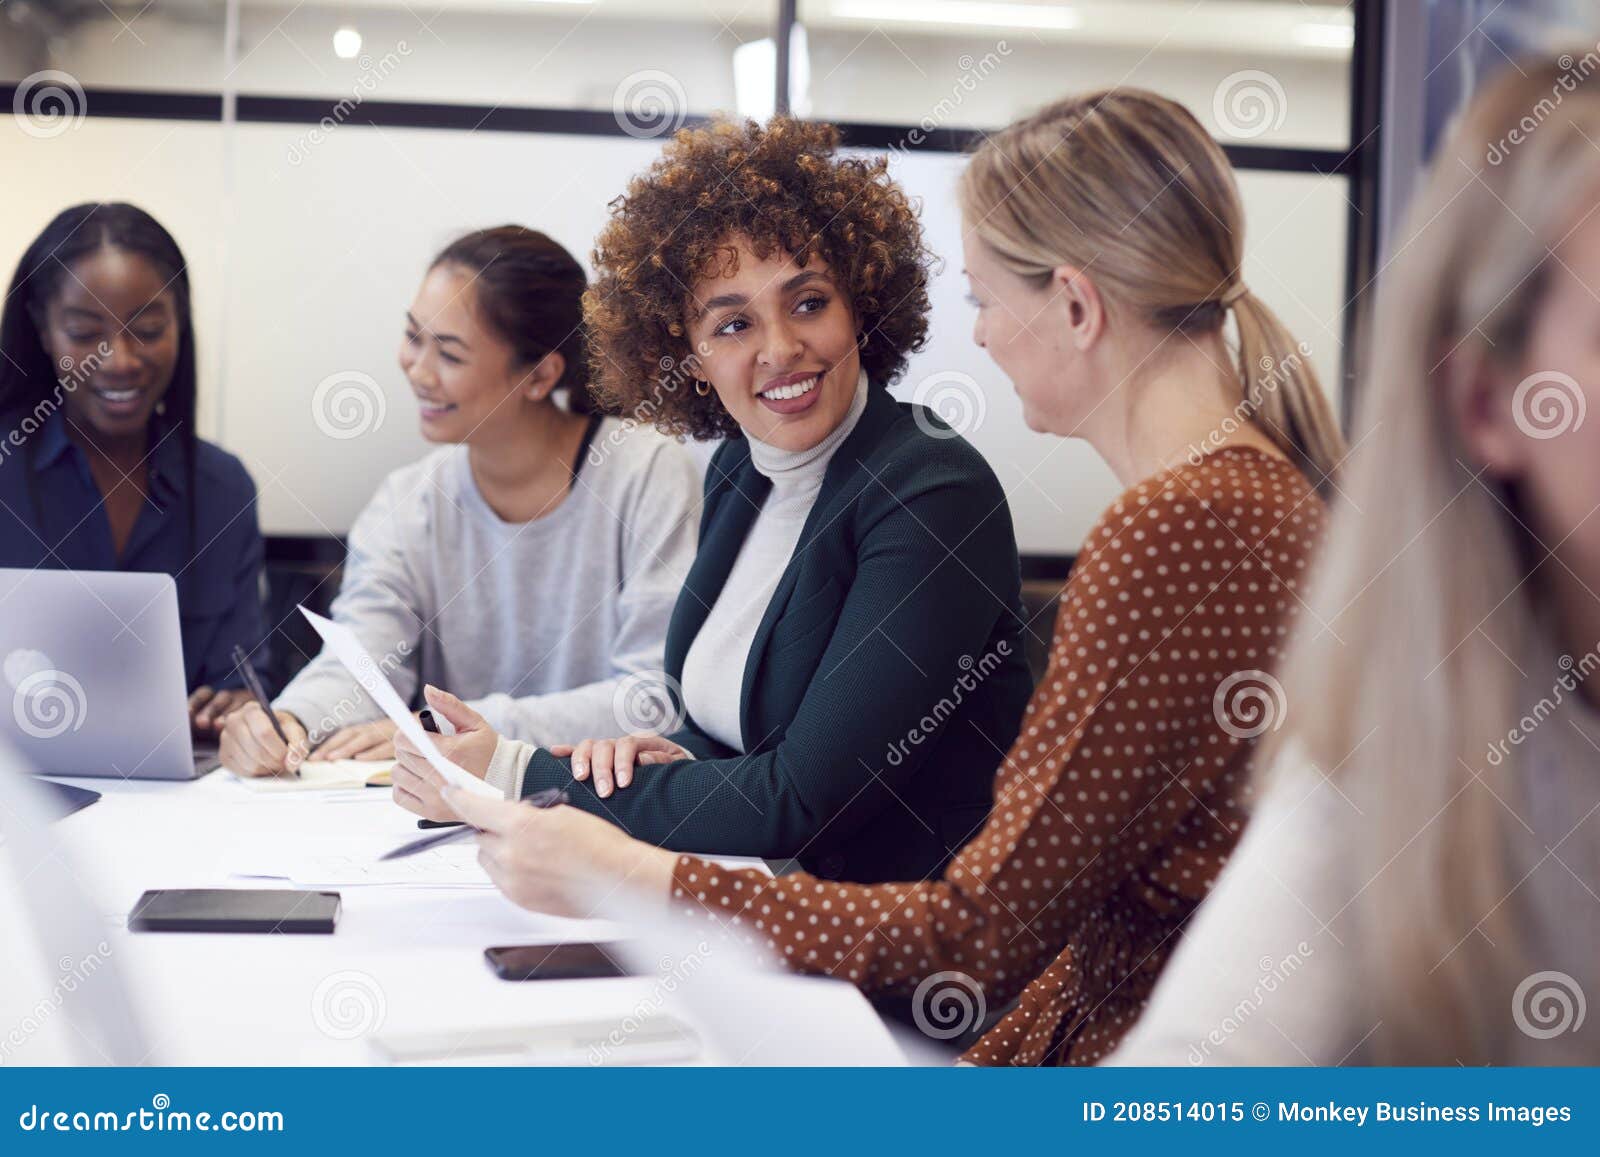 group of businesswomen collaborating in creative meeting around table in modern office